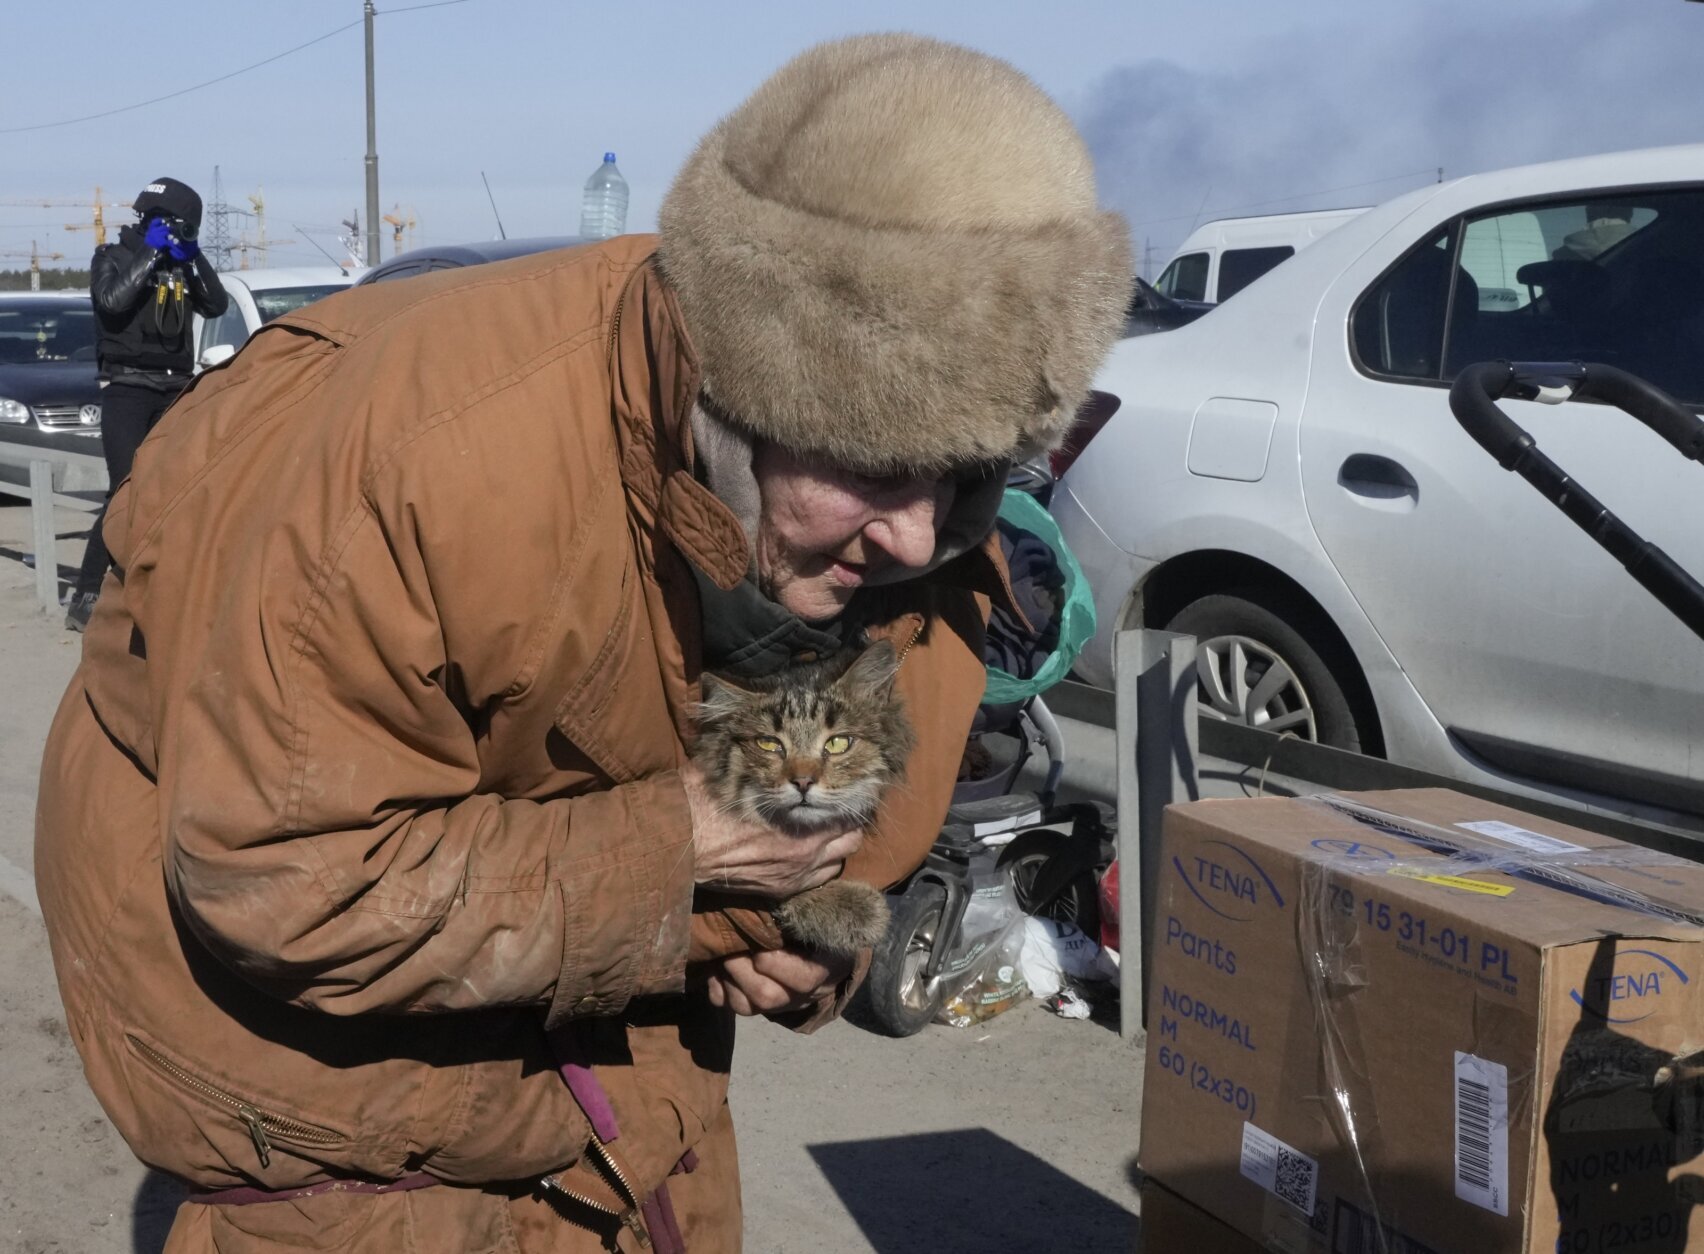 An elderly woman carries her cat as she flees from her hometown on the road towards Kyiv, in the town of Irpin, some 25 km (16 miles) northwest of Kyiv, Saturday, March 12, 2022. Kyiv northwest suburbs such as Irpin and Bucha have been enduring Russian shellfire and bombardments for over a week prompting residents to leave their homes. (AP Photo/Efrem Lukatsky)